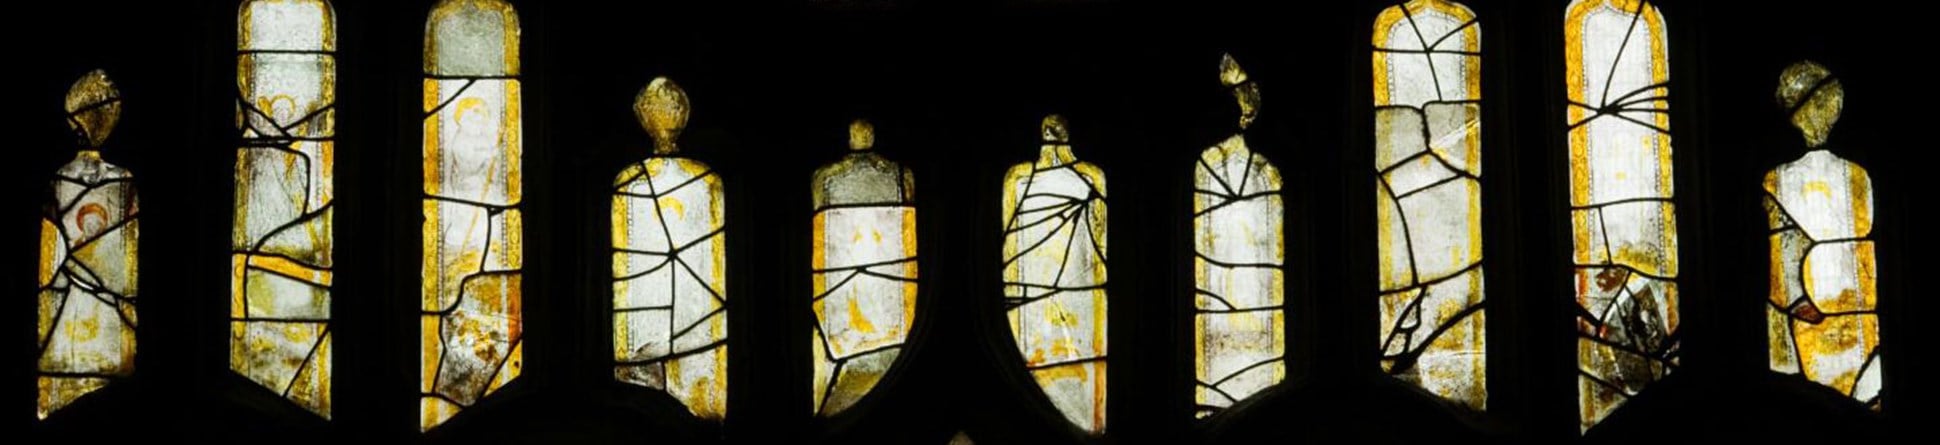 Stained glass window in need of conservation